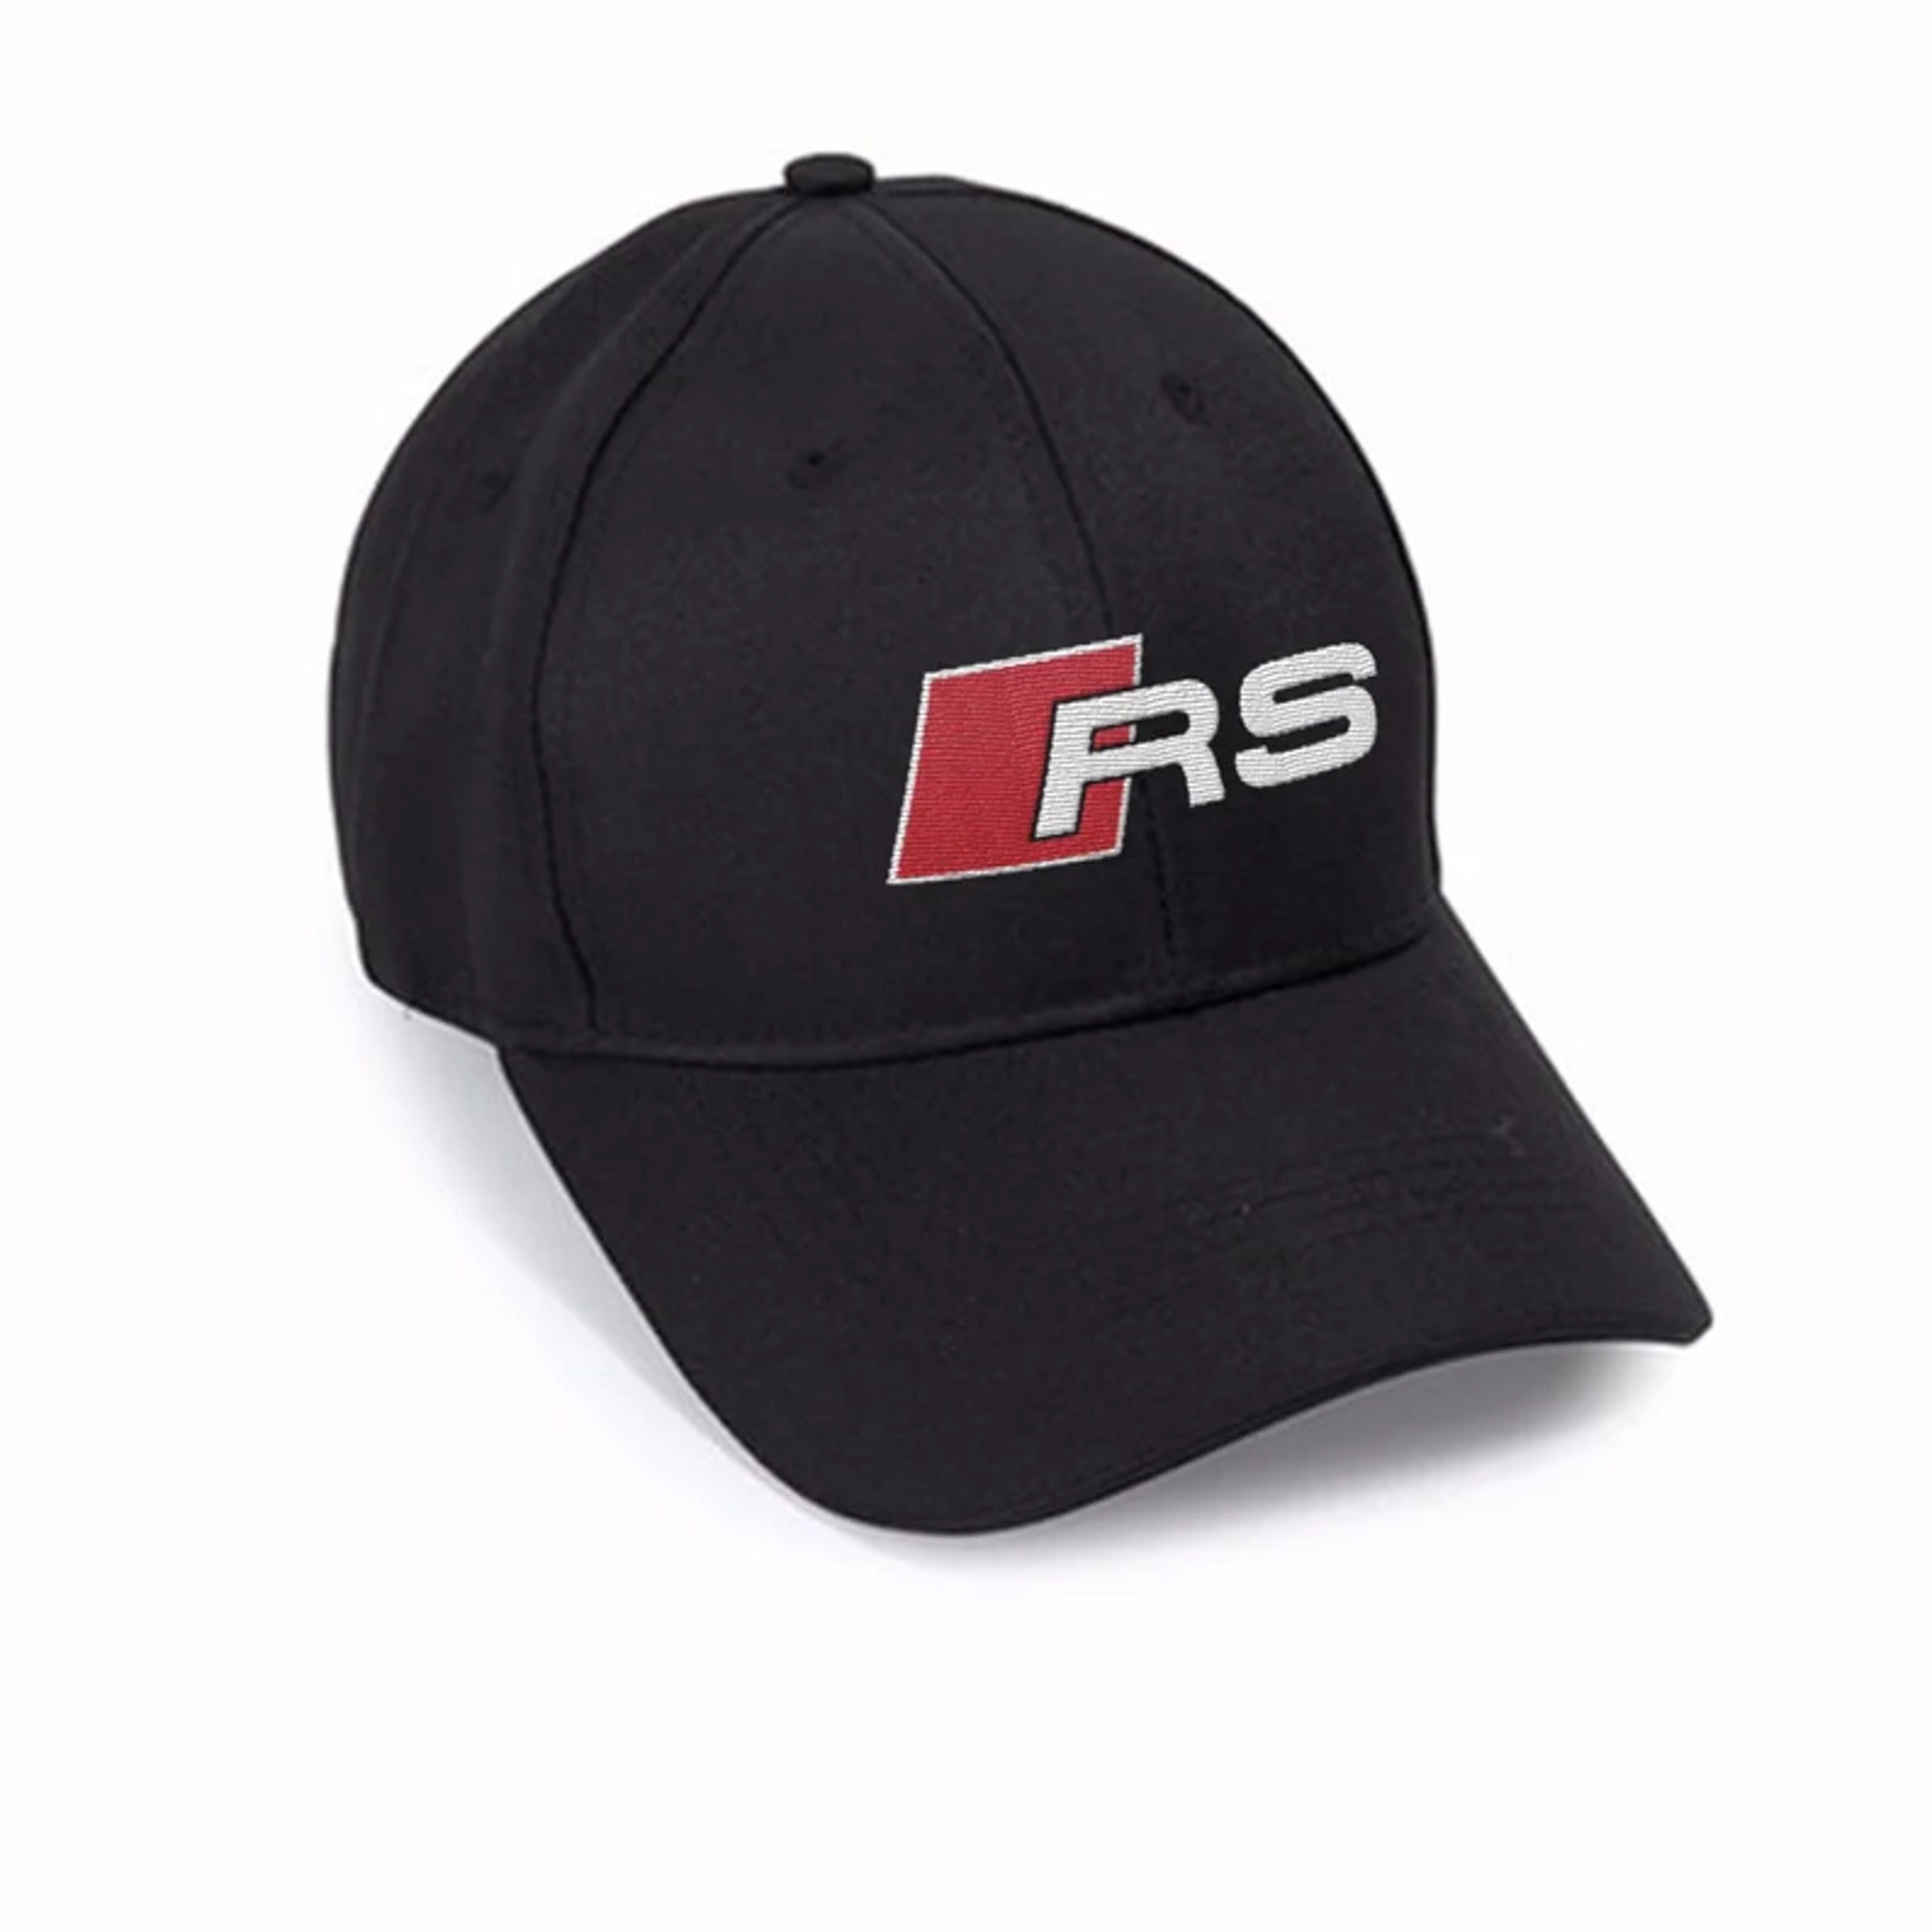 Audi RS Embroidery hat, baseball embroidered cap